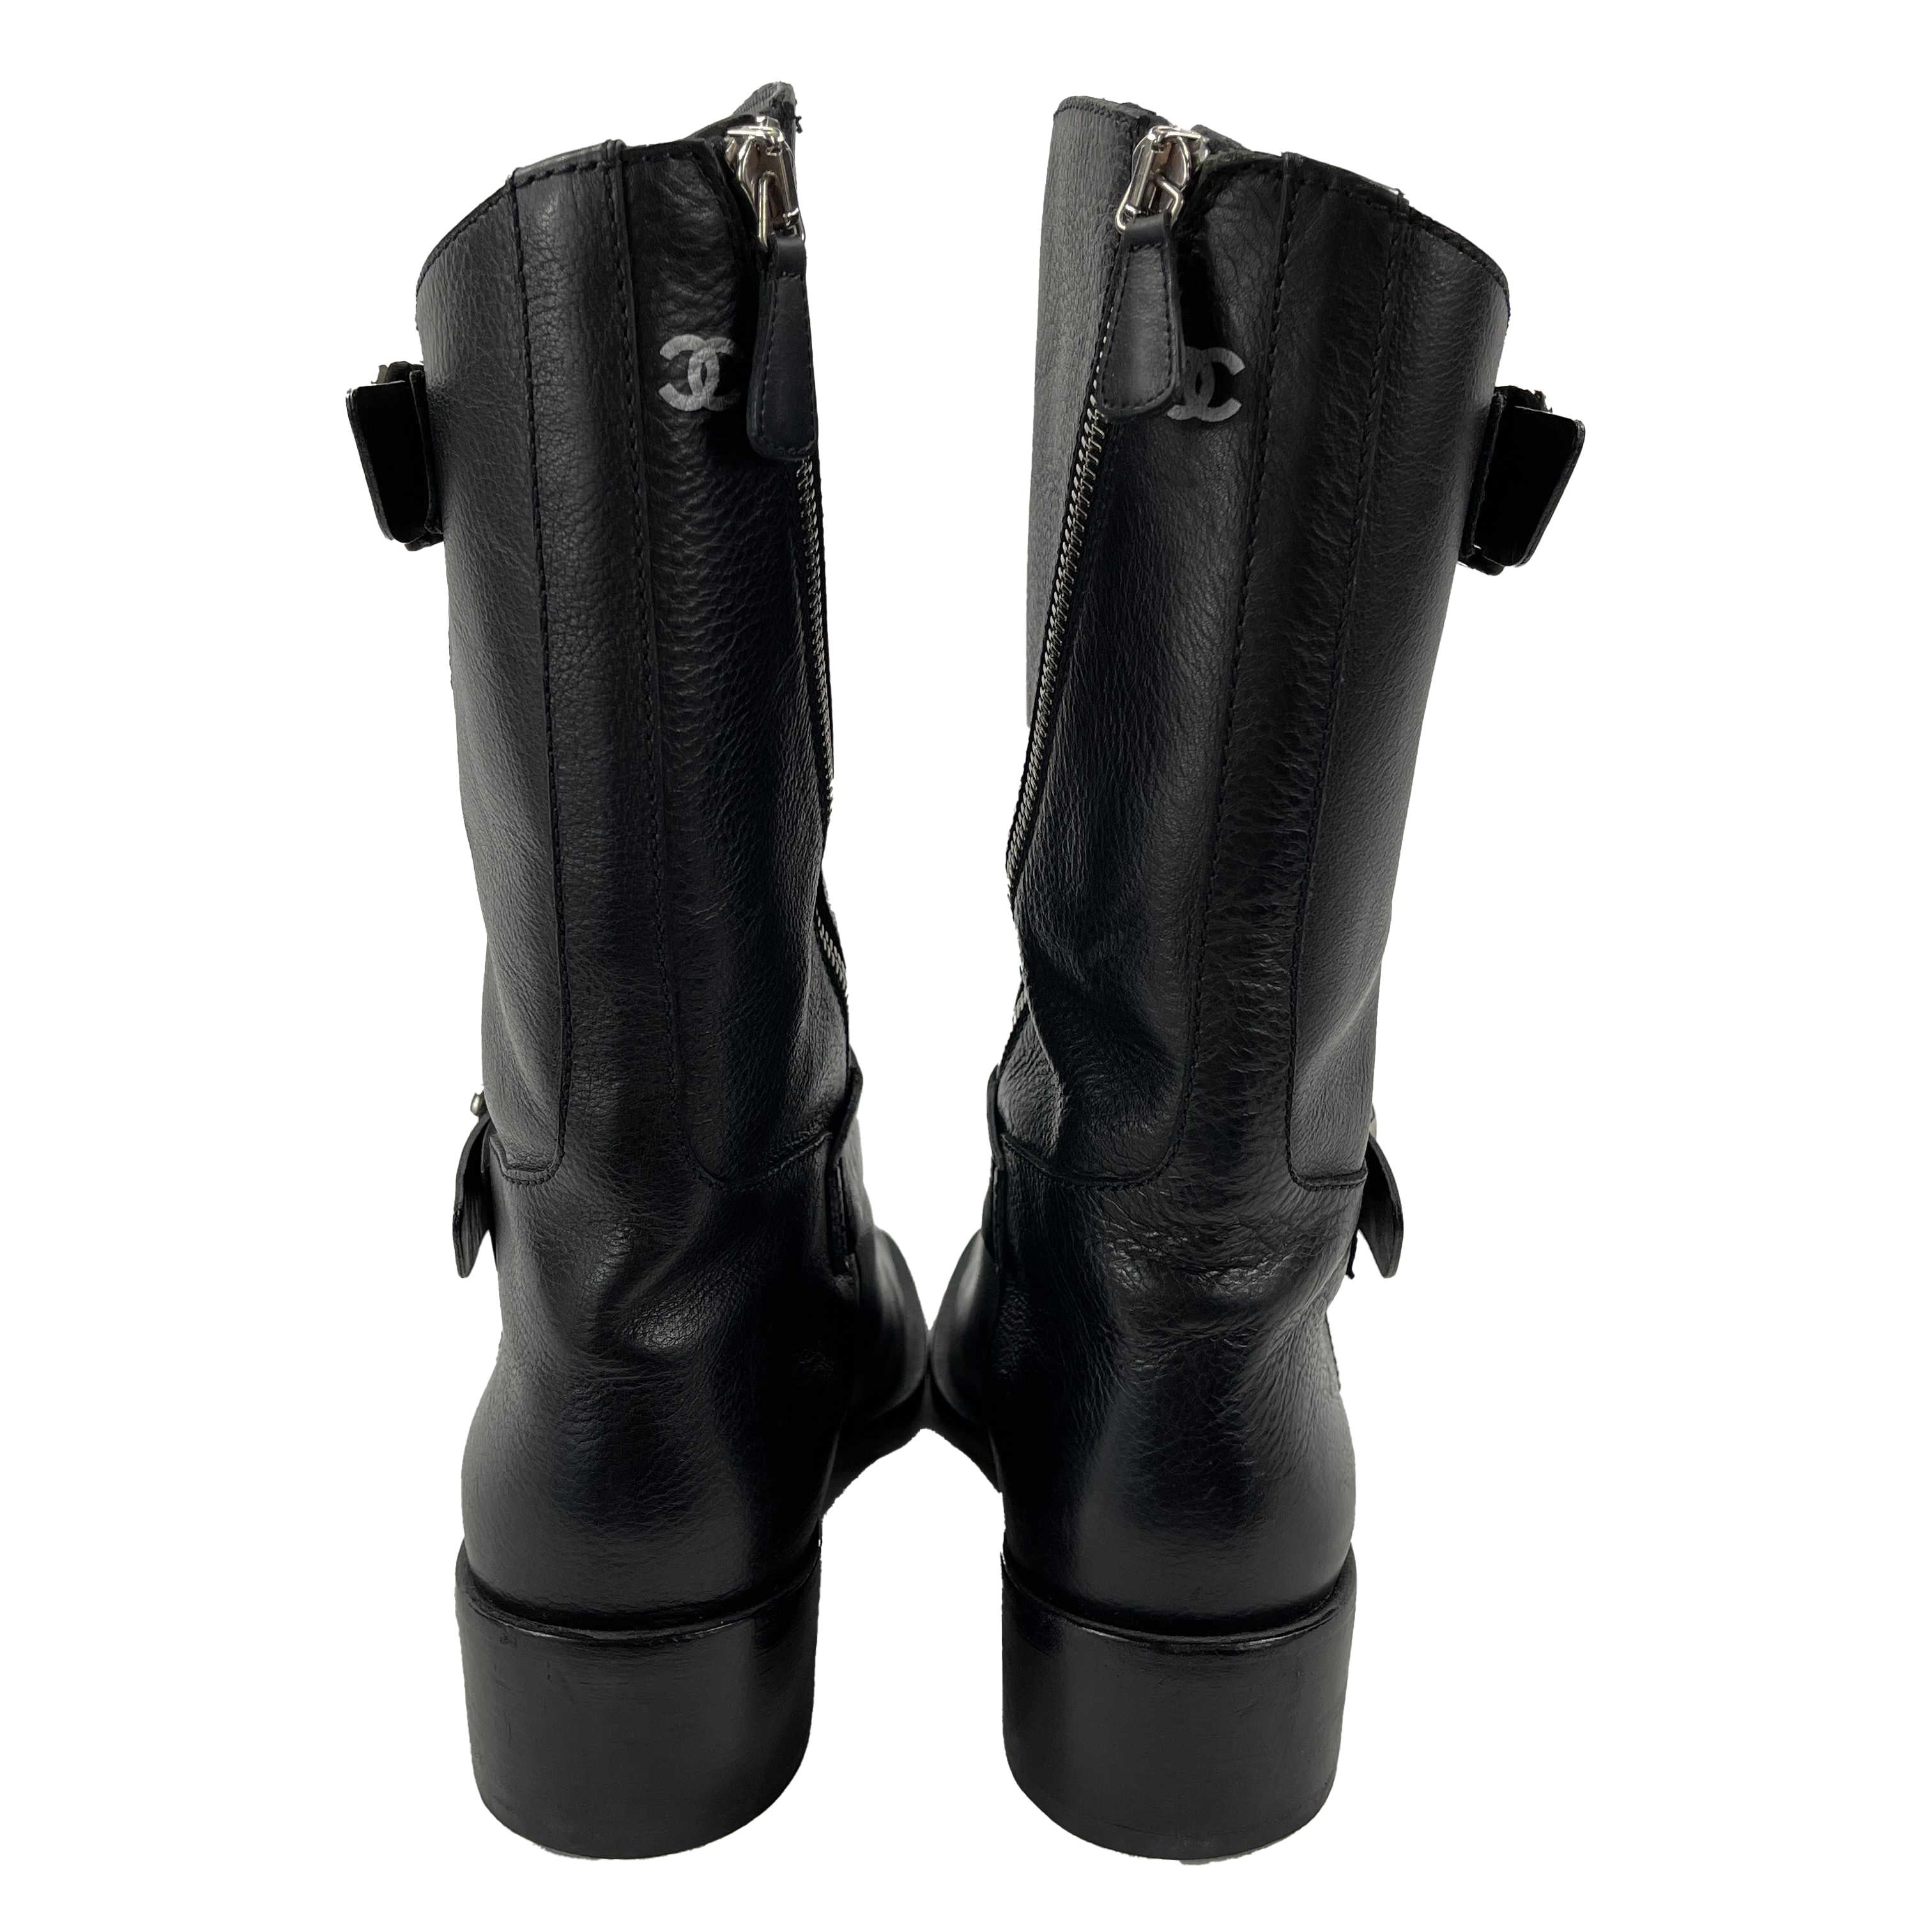 CHANEL - Excellent - 14B Leather Buckle Moto Biker Boots - Black, Silver-Toned Hardware - 38- US 8 - Shoes

Description

These Chanel moto biker boots are from the 2014 Fall/Winter Act 1 Collection.
They are crafted with black leather and